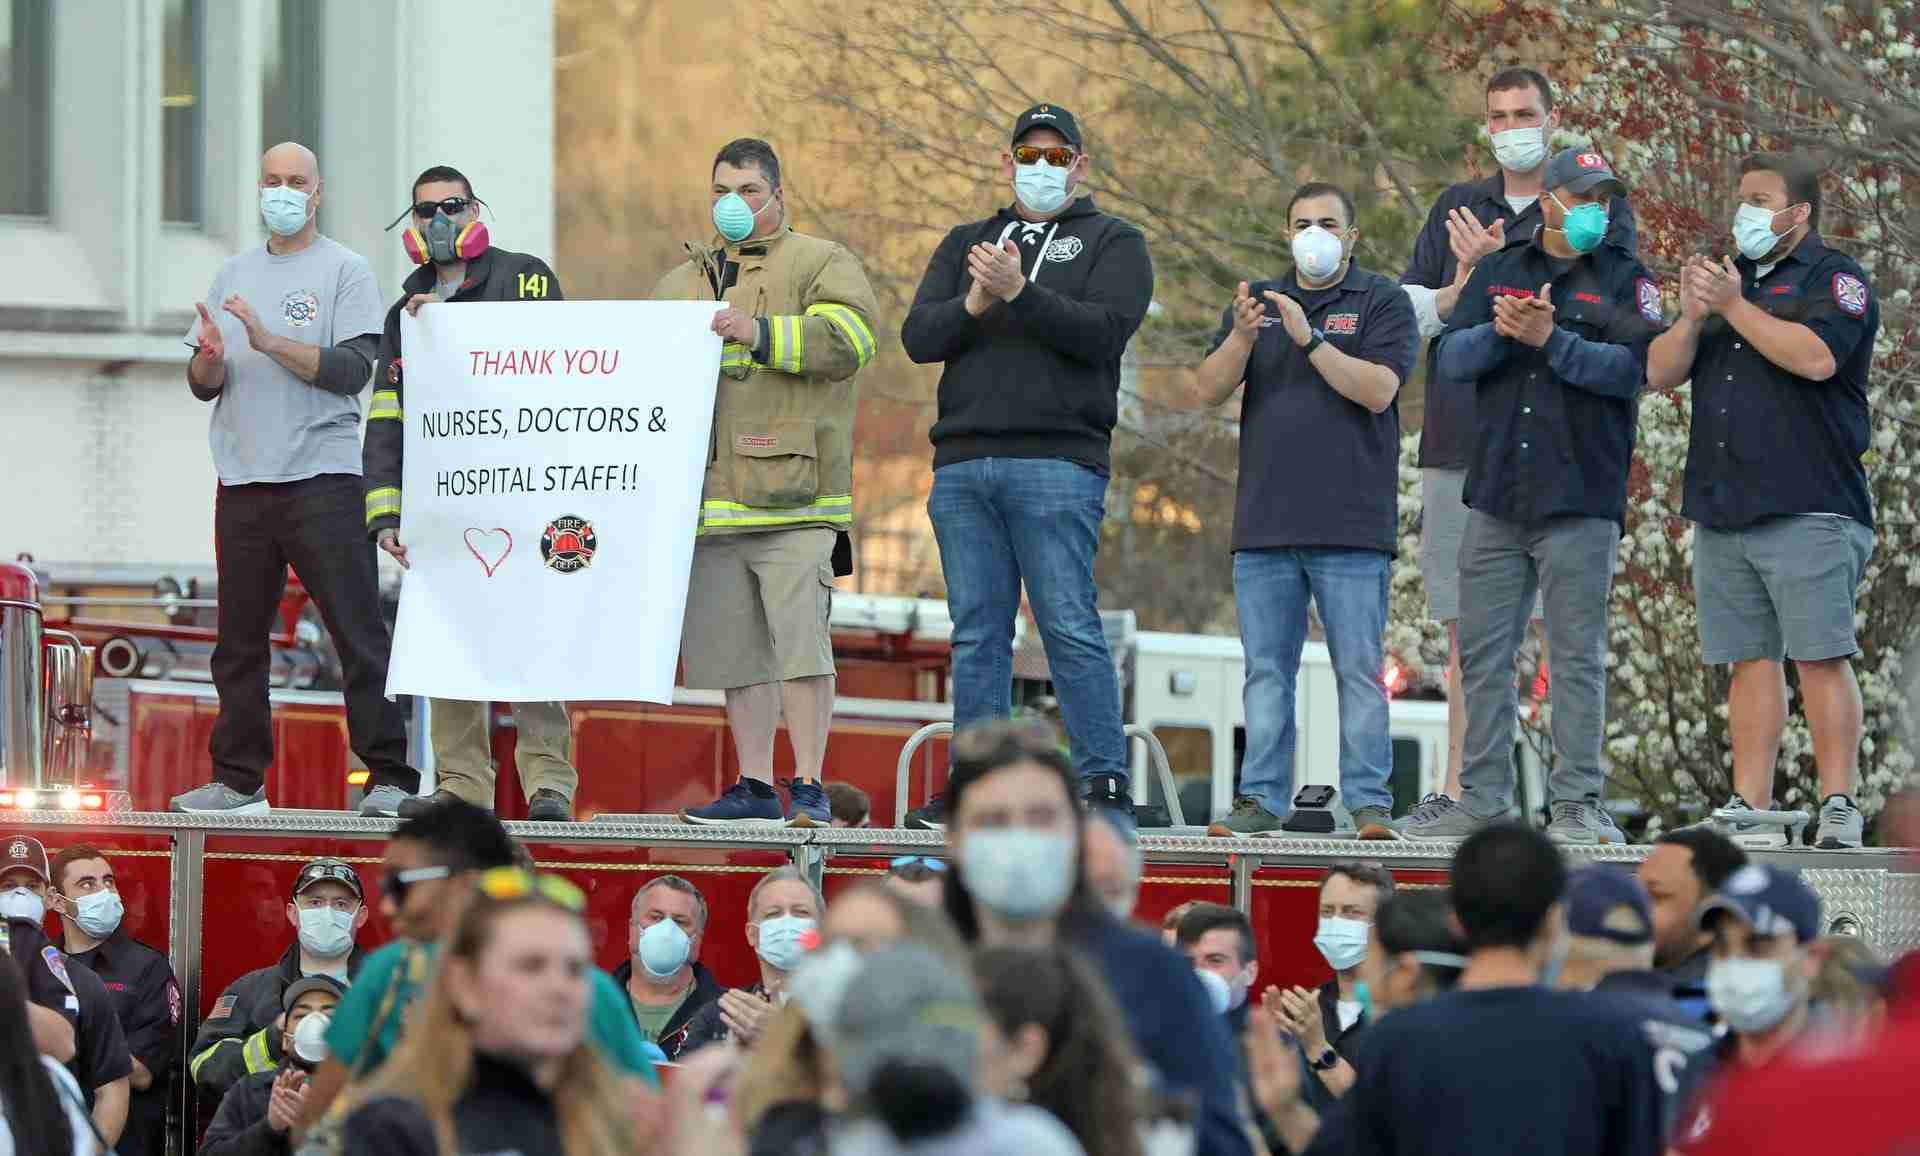 First Responders gathered outside of Northern Westchester Hospital in Mount Kisco, N.Y. on April 8, 2020, to applaud the doctors, nurses and staff for the hard work they are doing during the coronavirus pandemic.